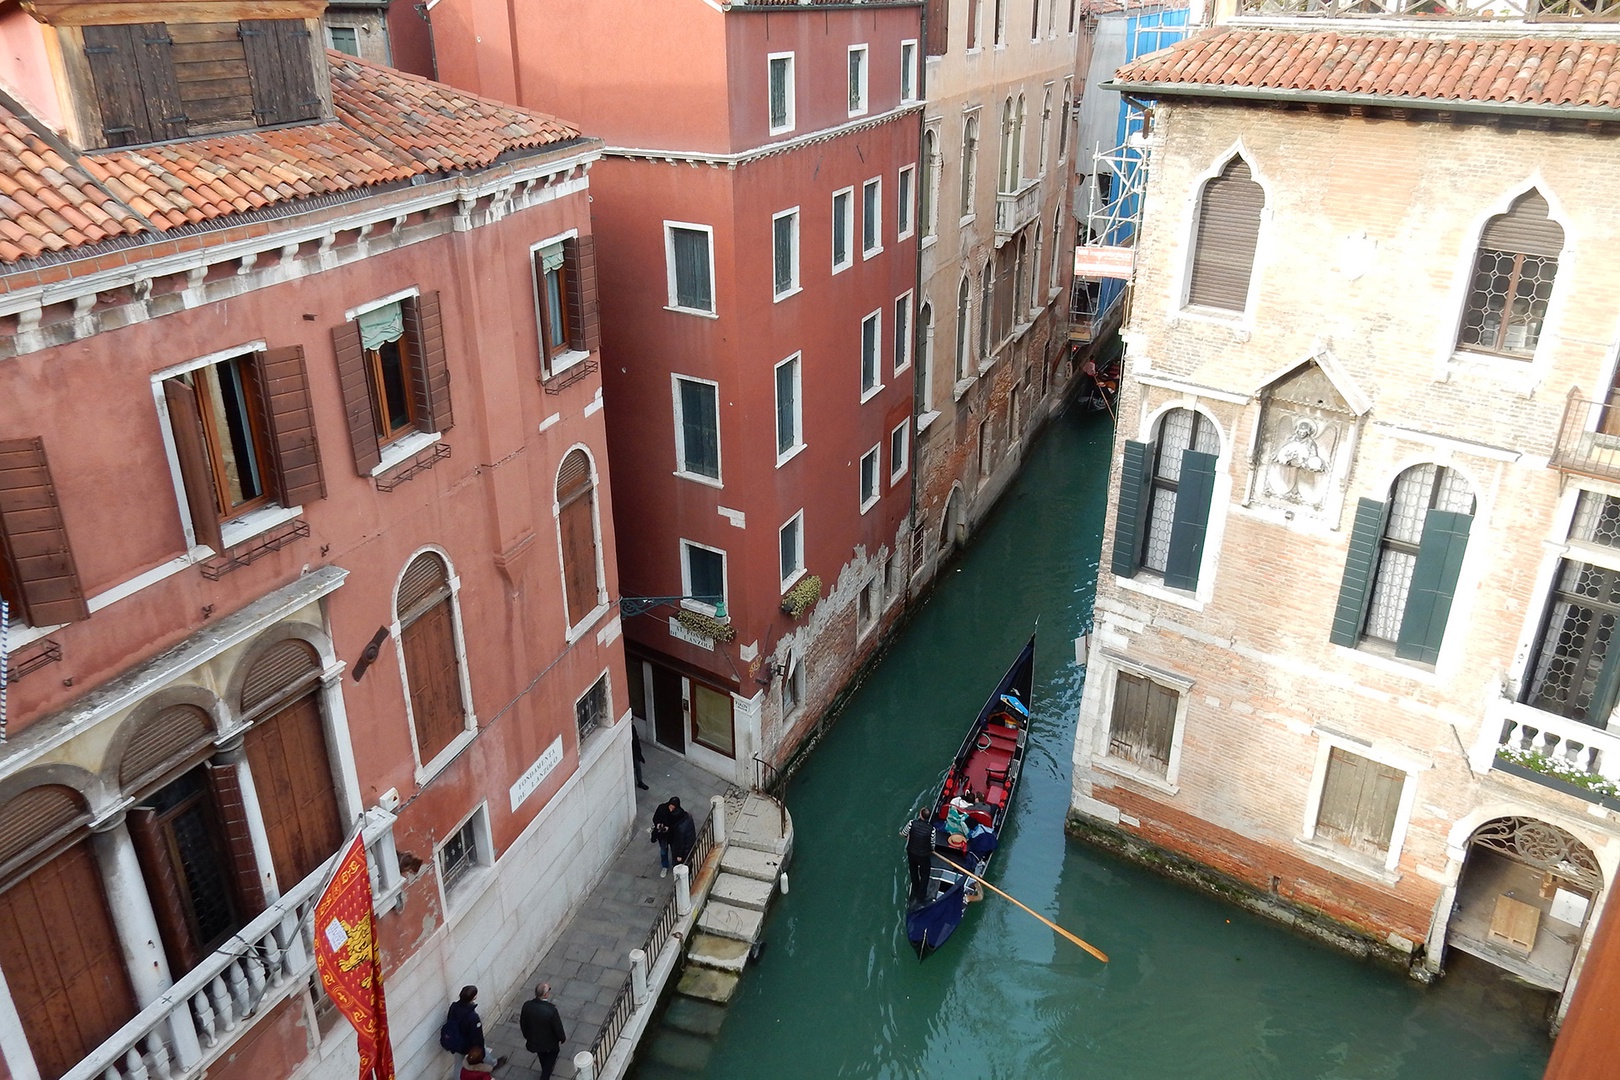 There is something mesmerizing about watching the gondolas as they glide by on the canal below.